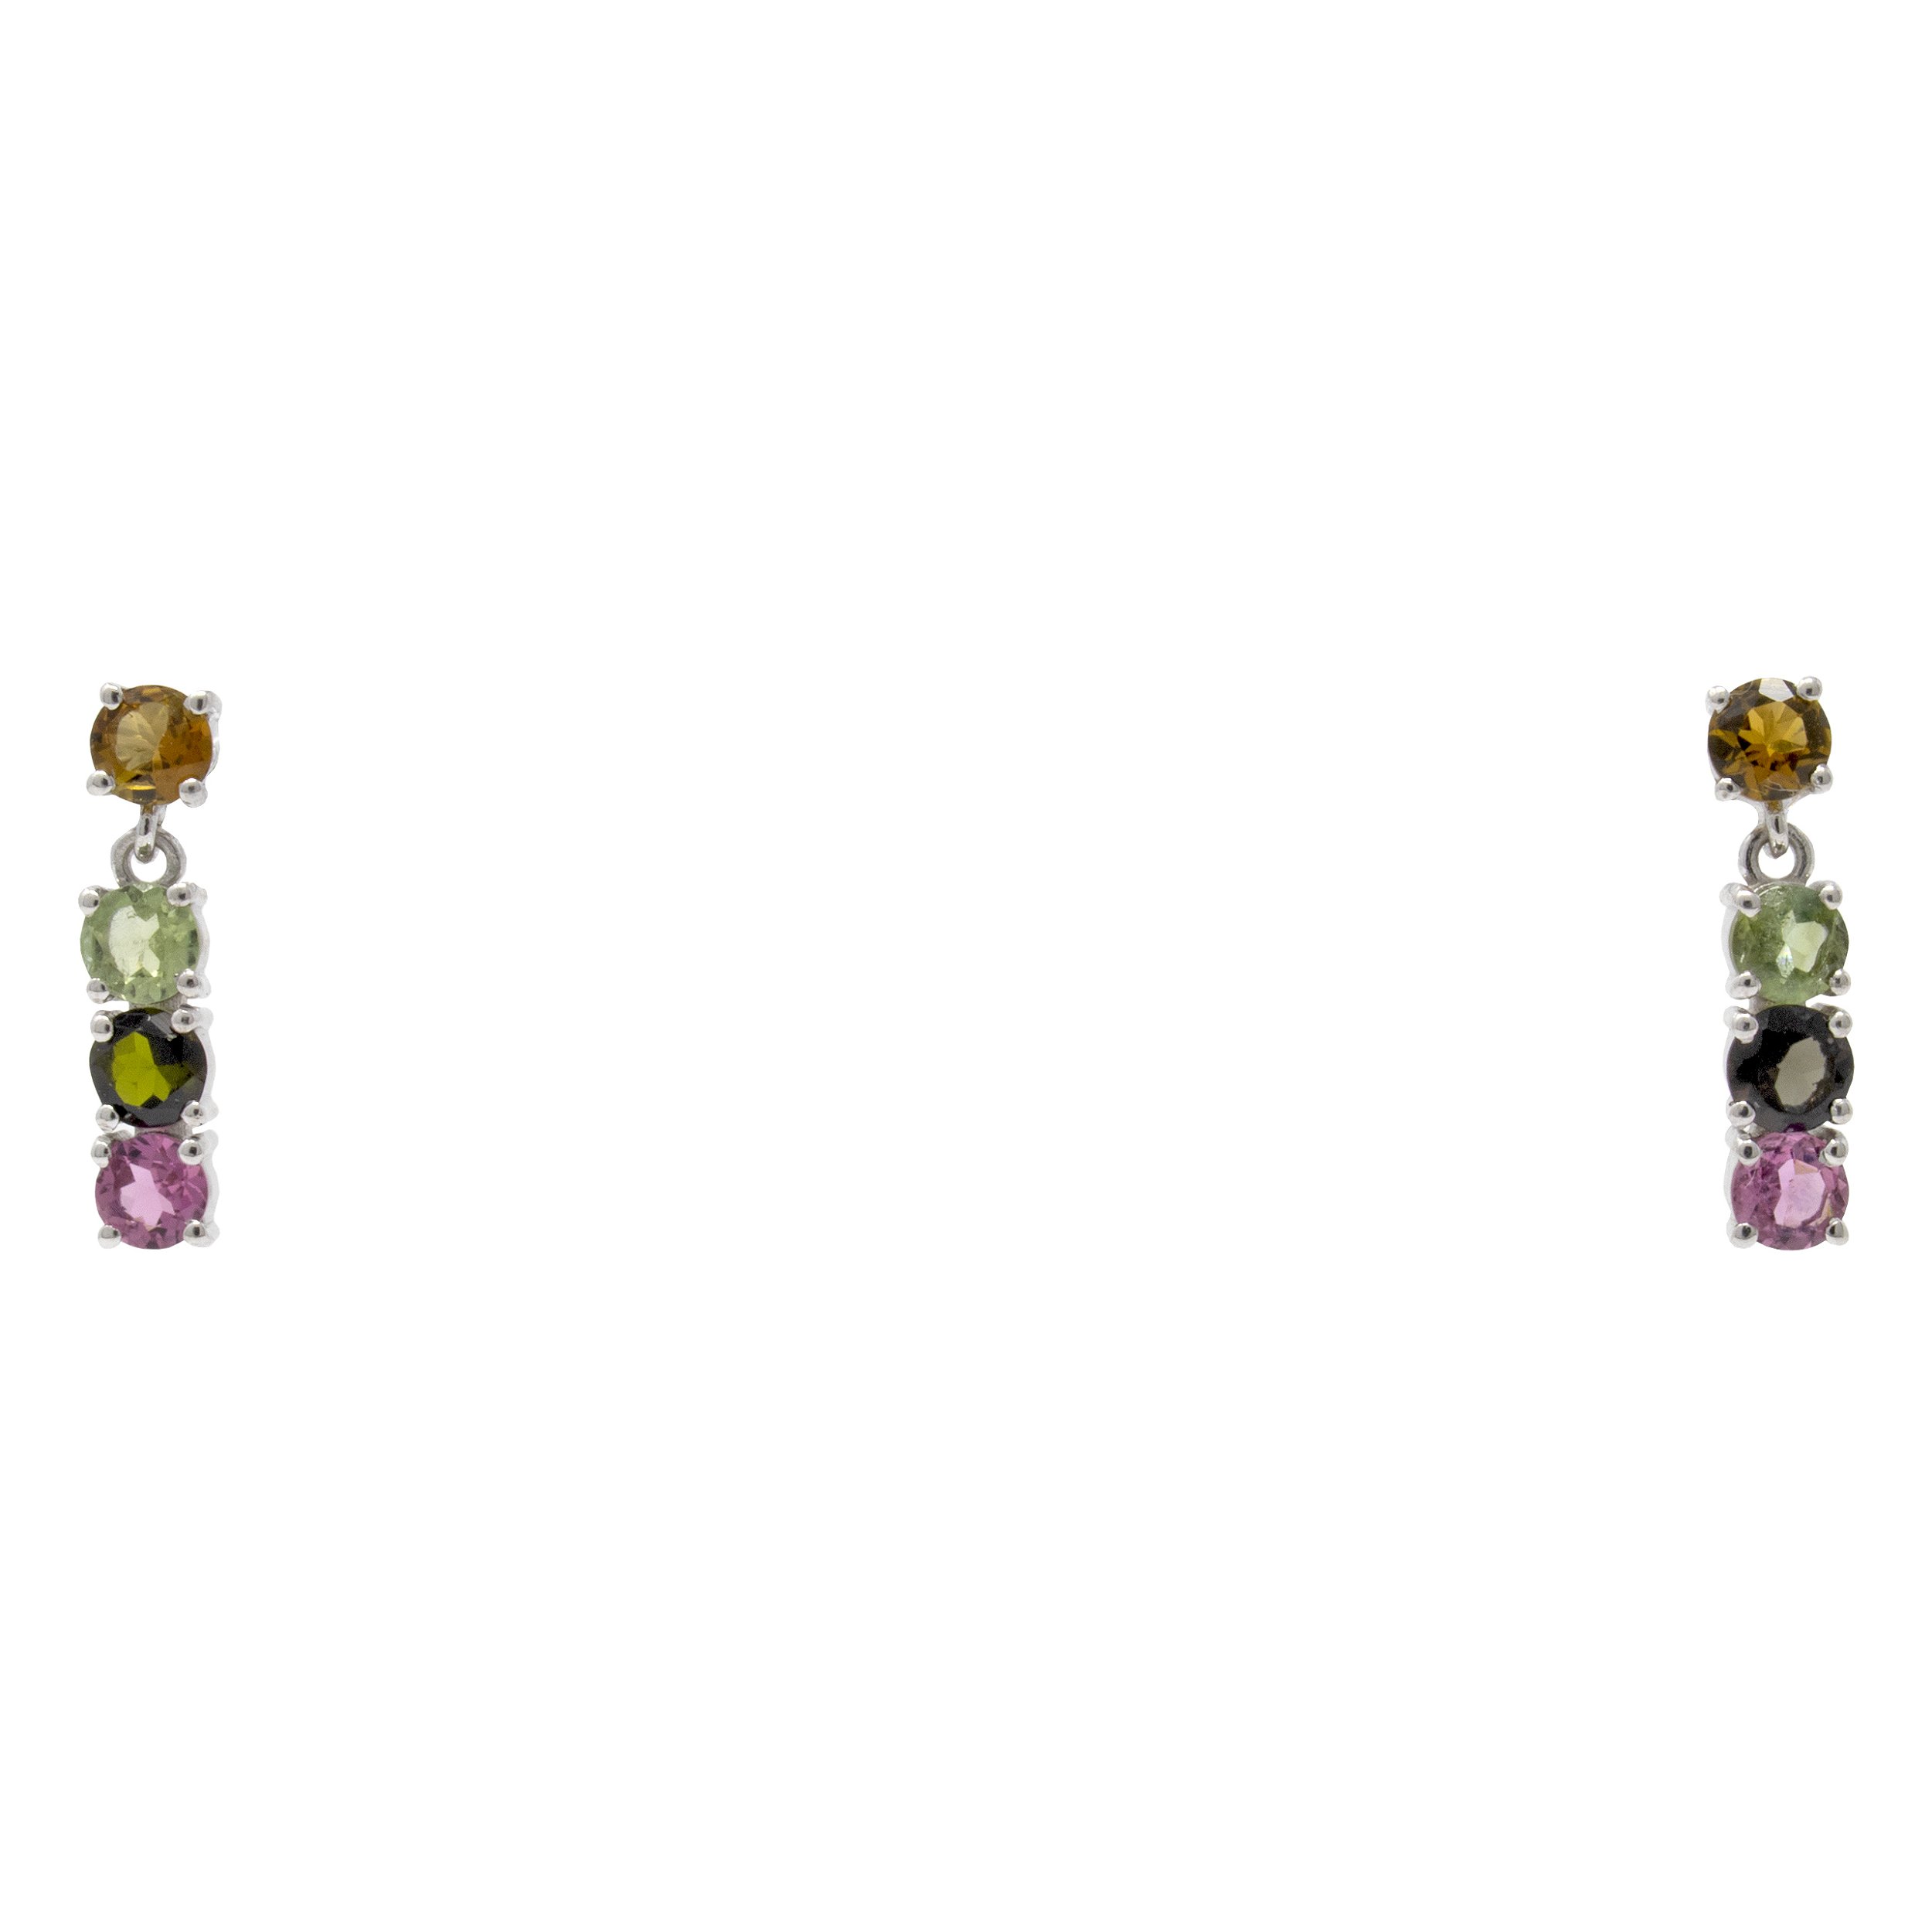 Multi Tourmaline Dangle Earrings On-post - 4 Faceted Rounds Prong Set With Tall Silver Bezels